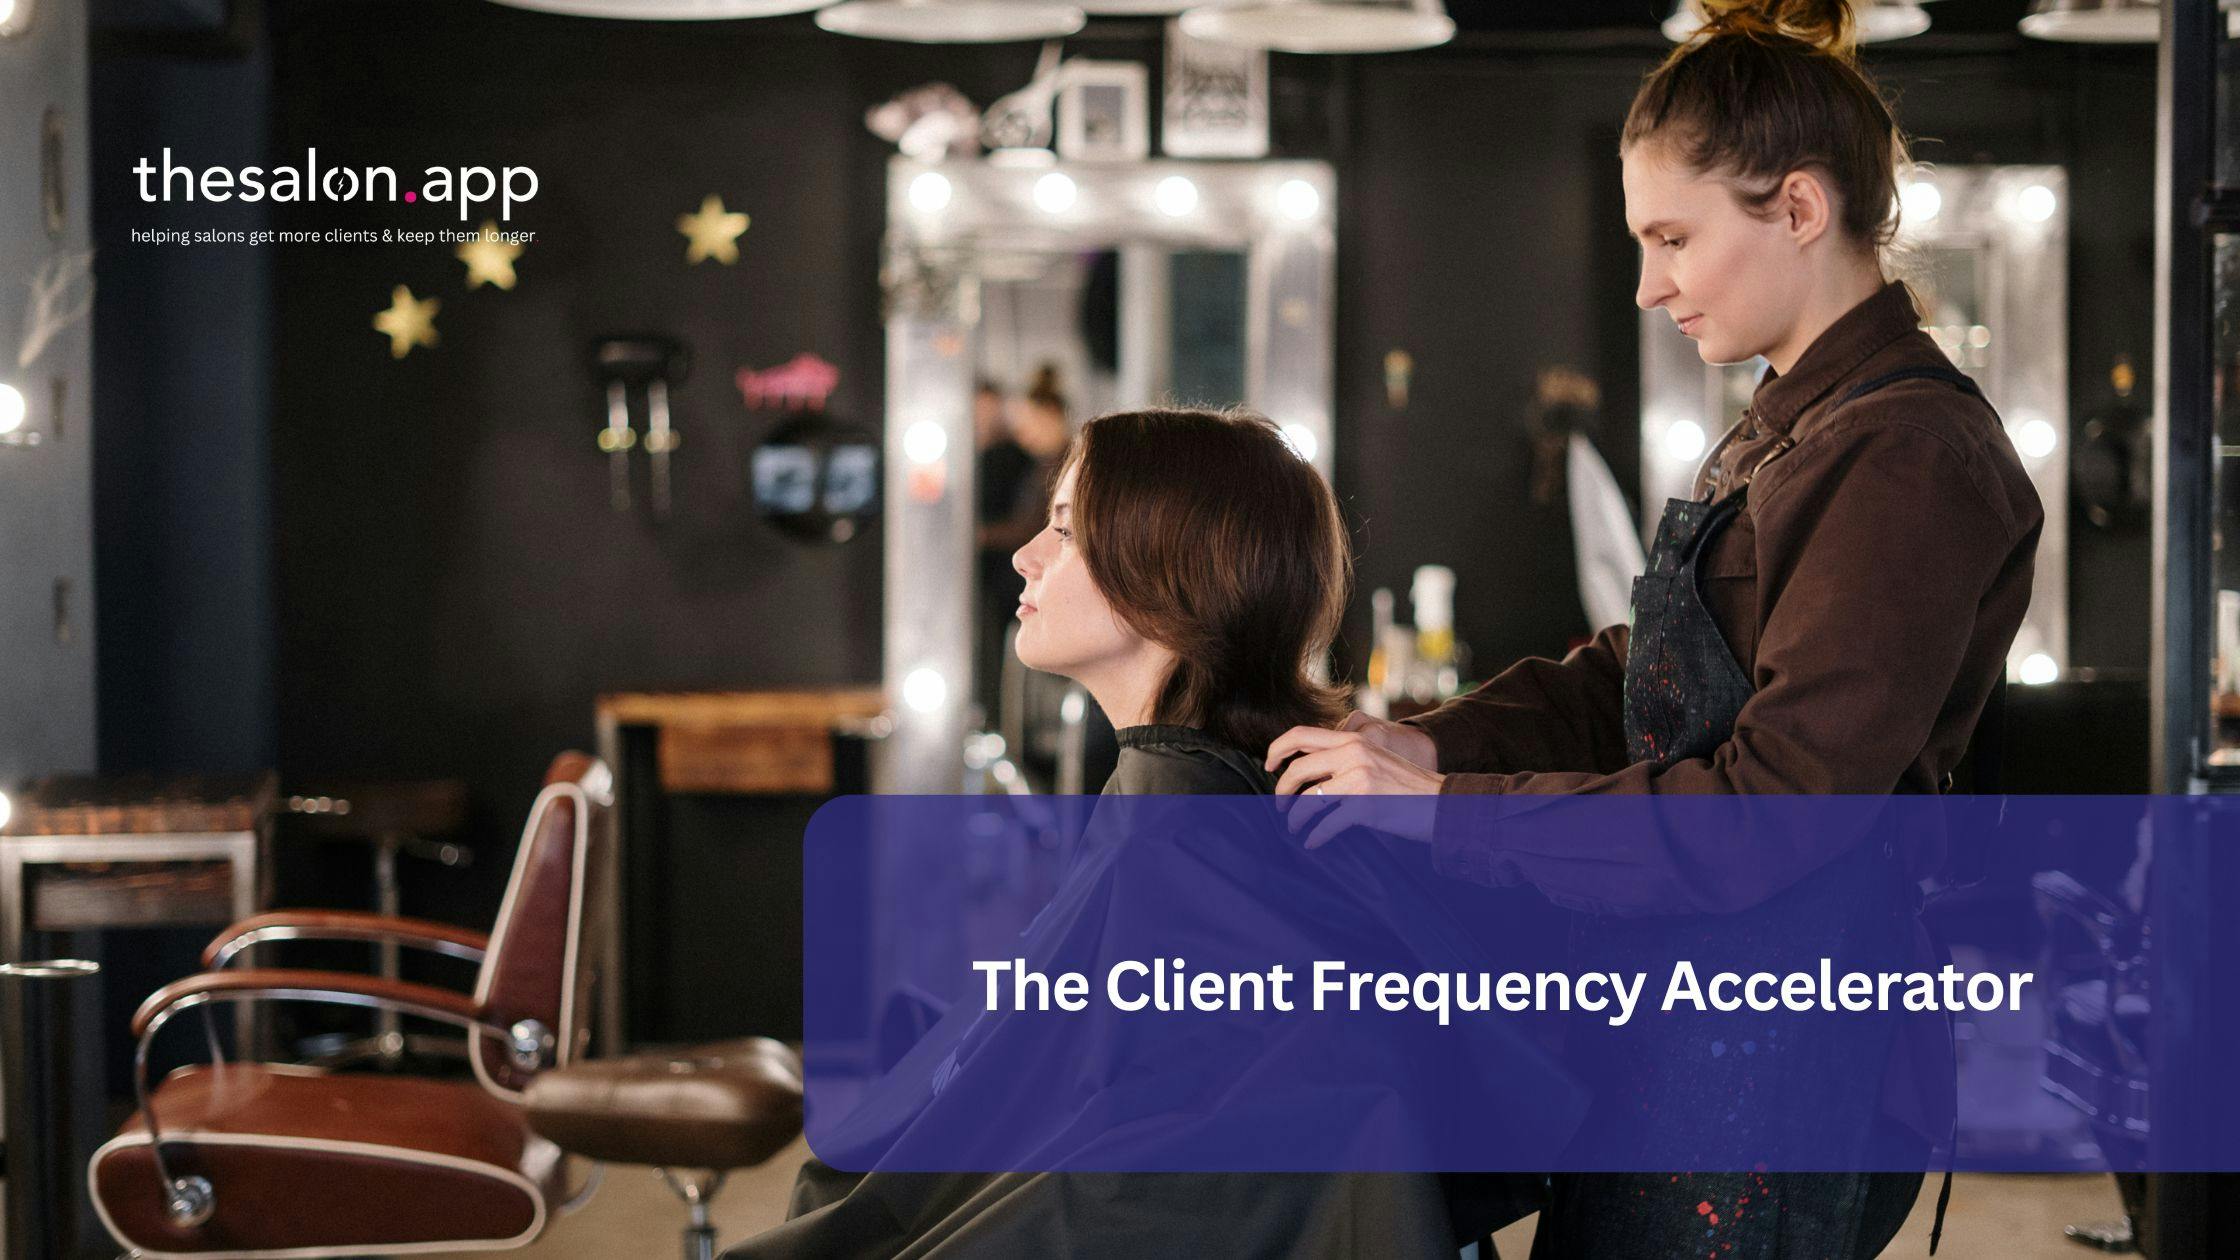 The Client Frequency Accelerator